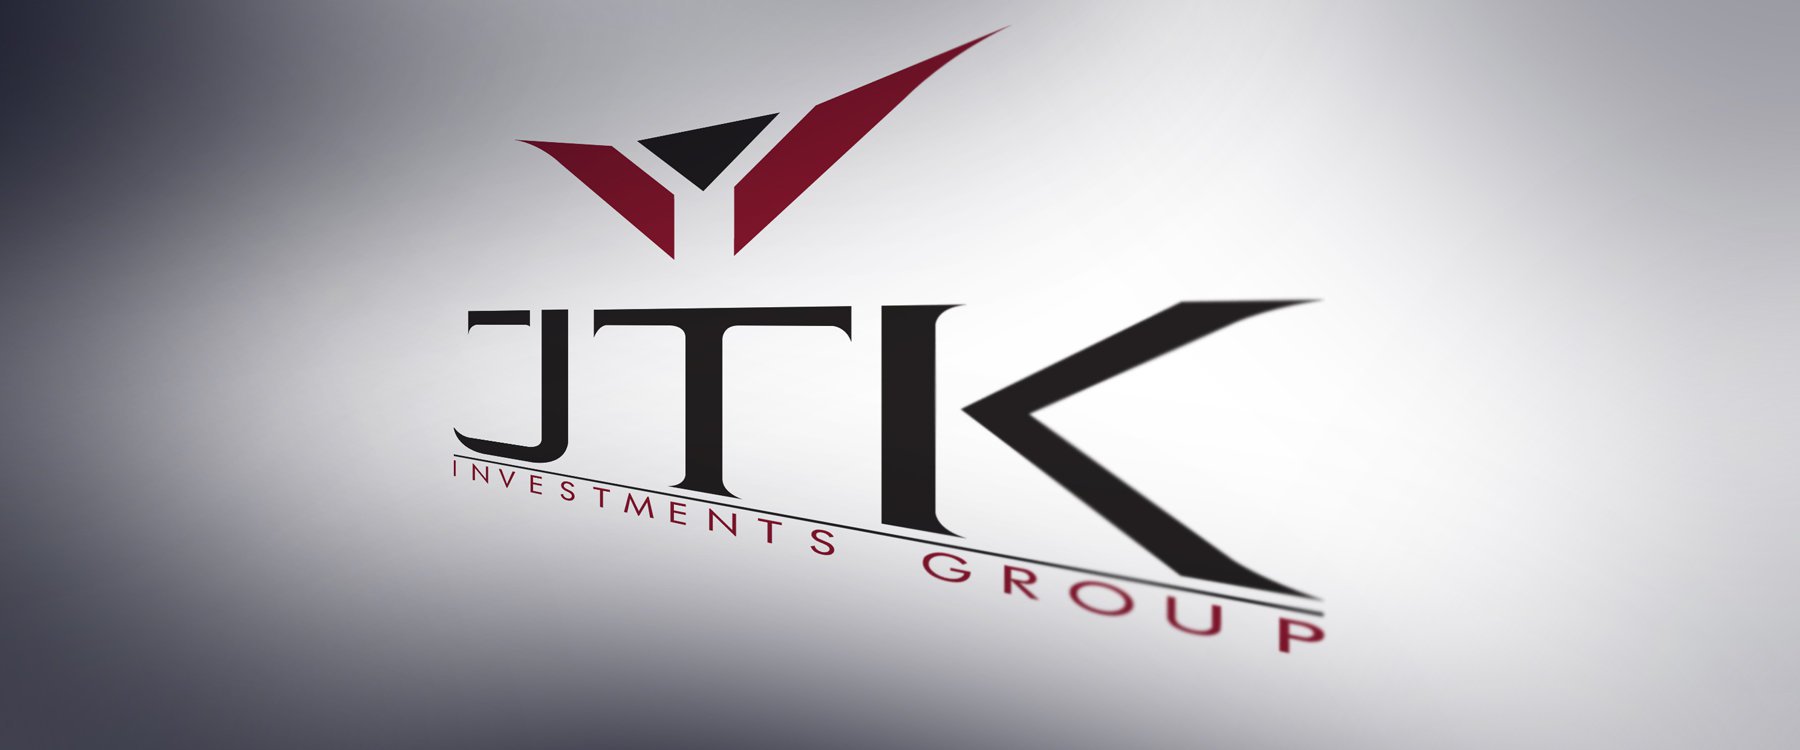 JTK Investments Group #3